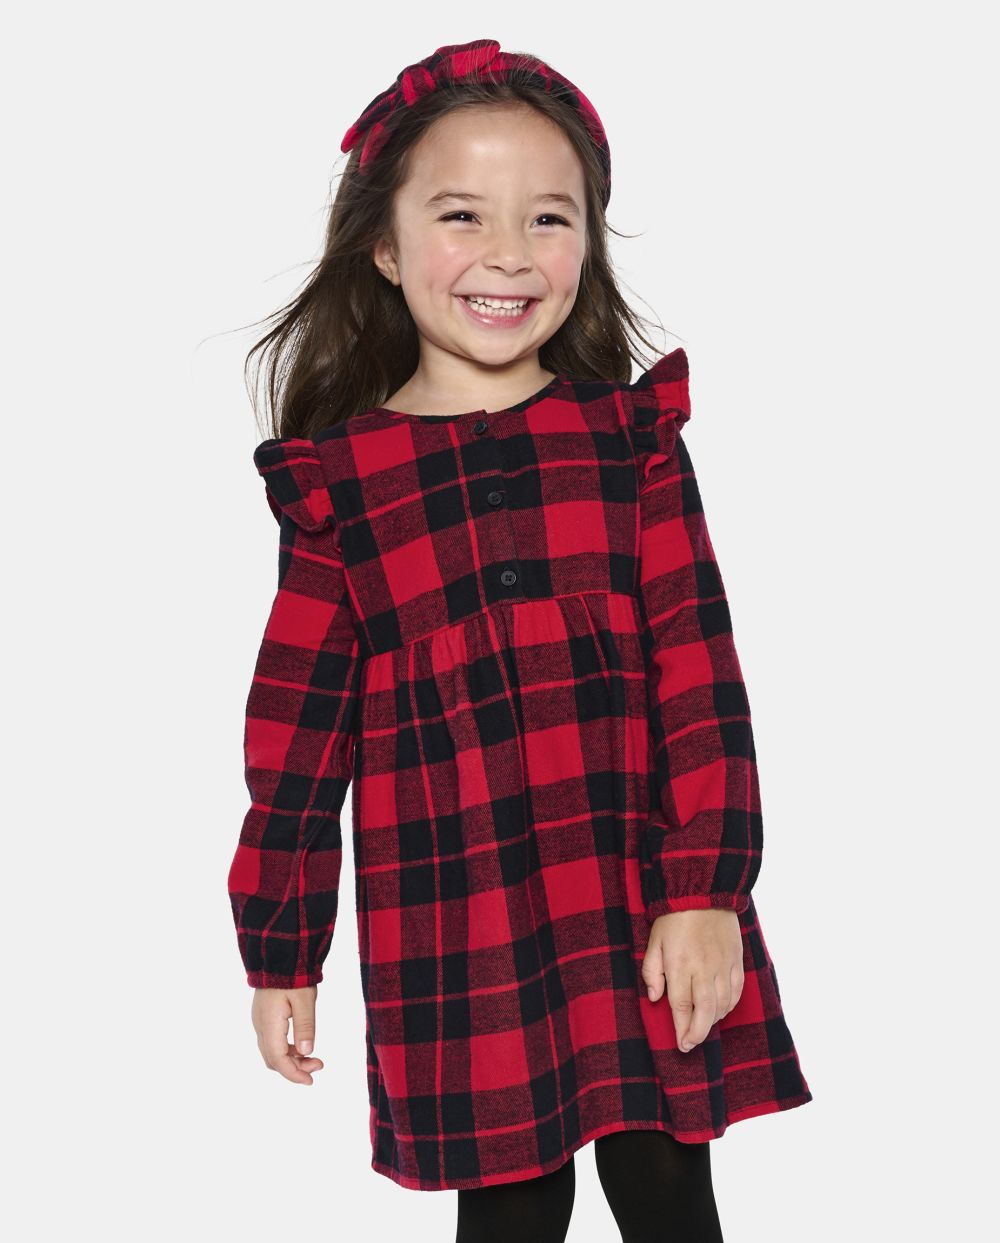 Toddler Baby Plaid Print Flutter Long Sleeves Above the Knee Crew Neck Button Front Shirt Dress